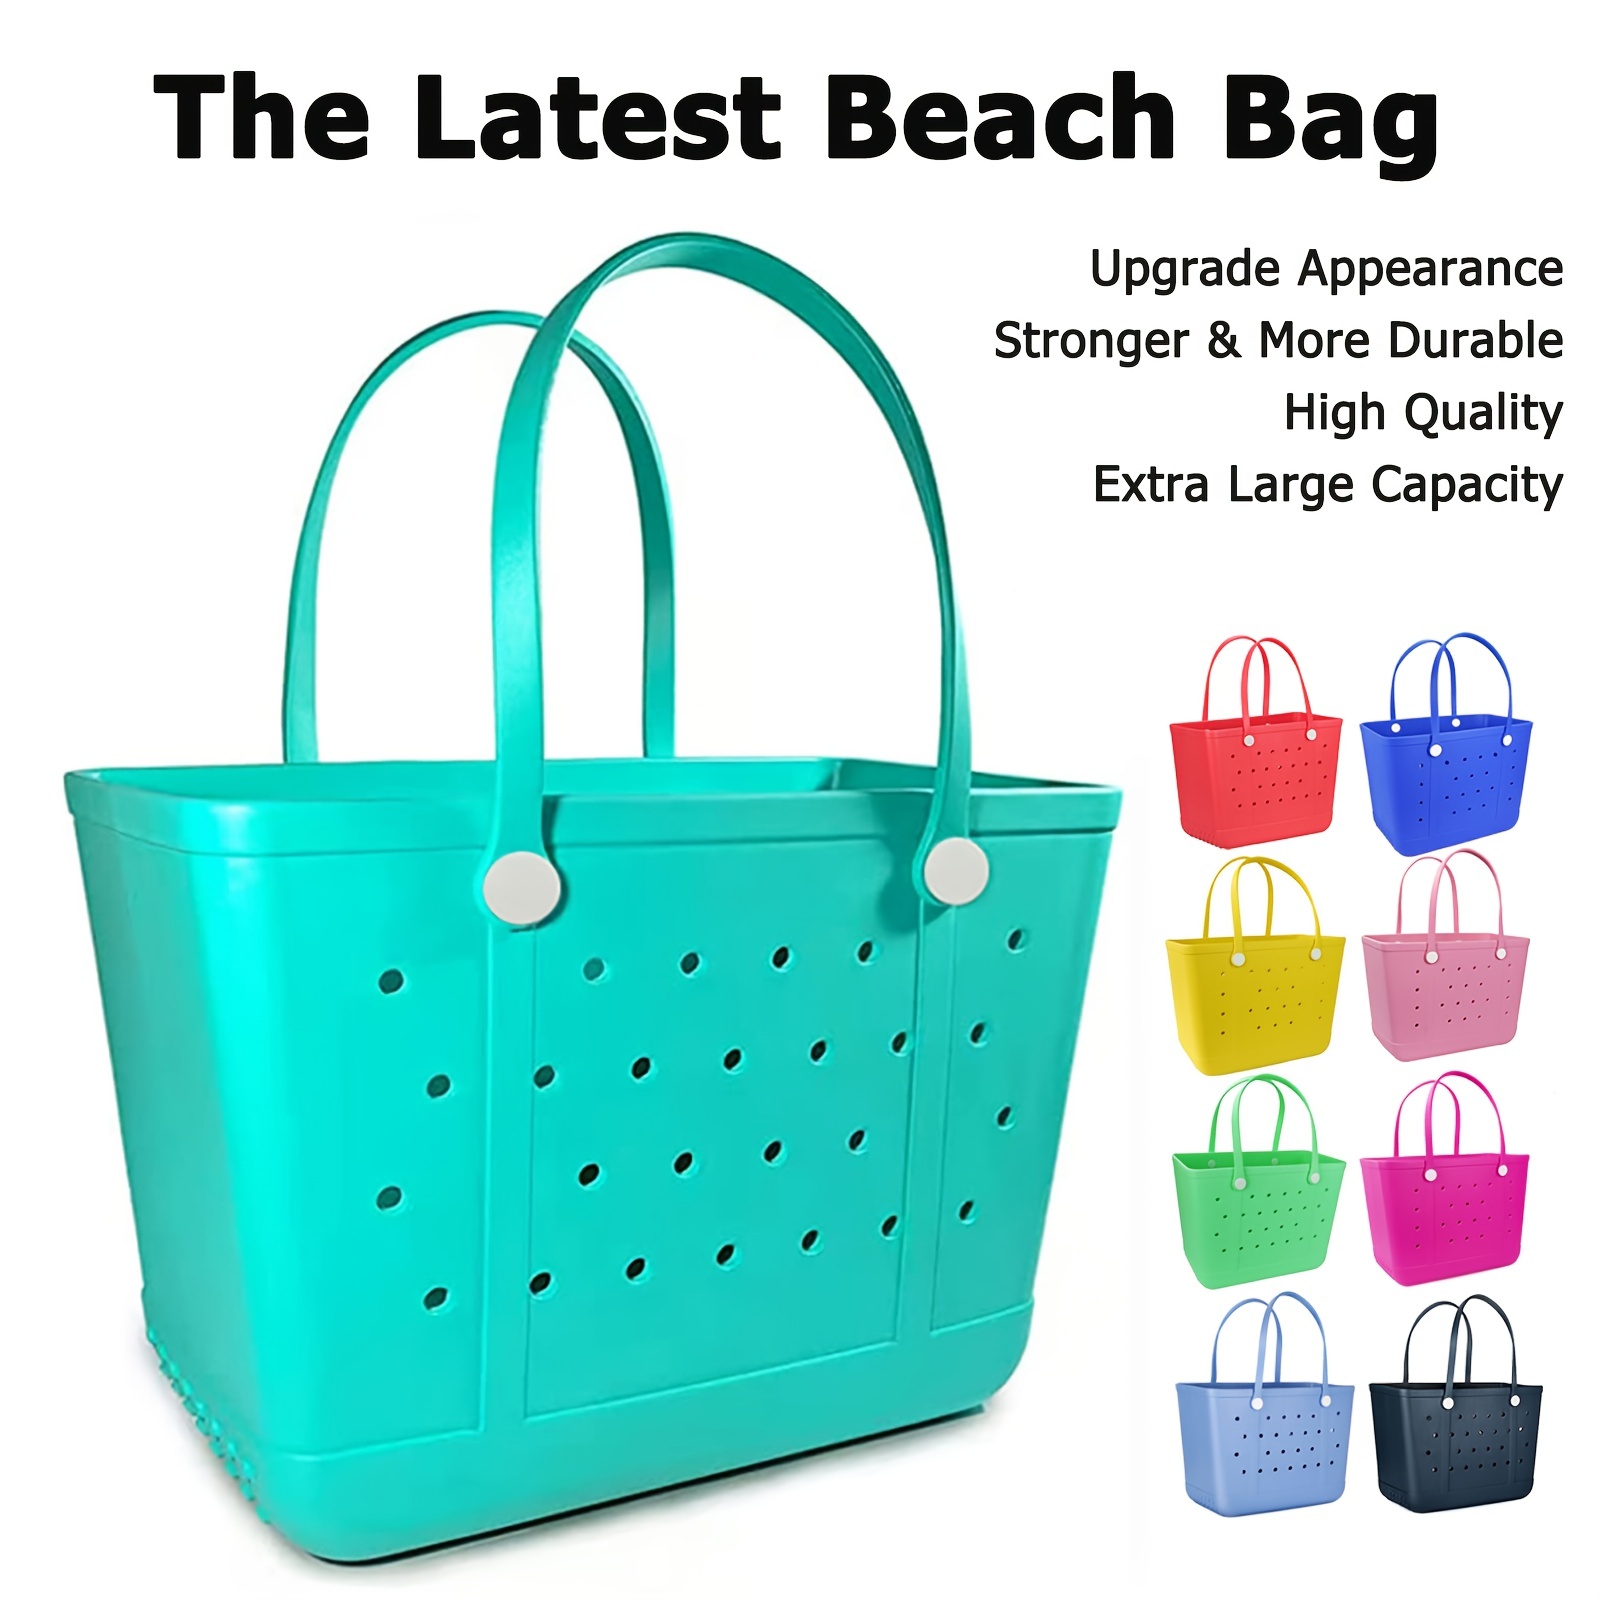 Oversized Rubber Beach Bag Waterproof EVA Portable Handbag Travel Bags with Holes  Tote Bag Women Handbag for Rubber Tote Bag Lightweight for  Beach,Gym,Swimming,Market,Red : .ca: Sports & Outdoors